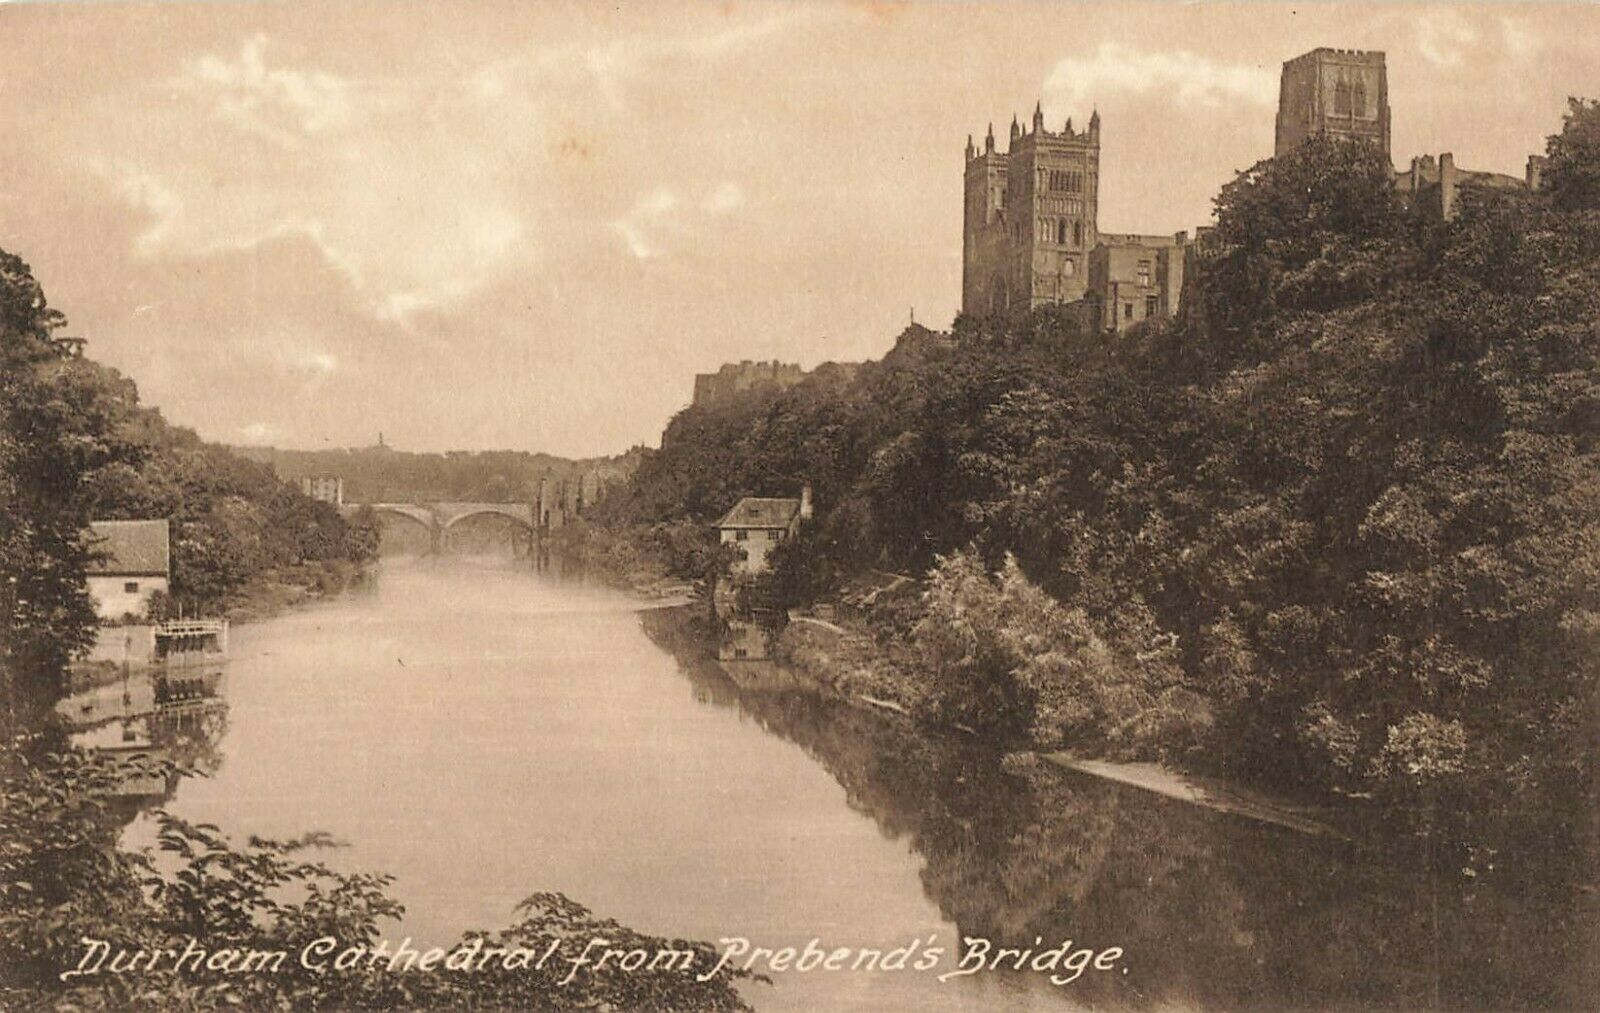 House Clearance - #122 Old Frith's service DURHAM CATHEDRAL Prebend's Bridge  No. 30736